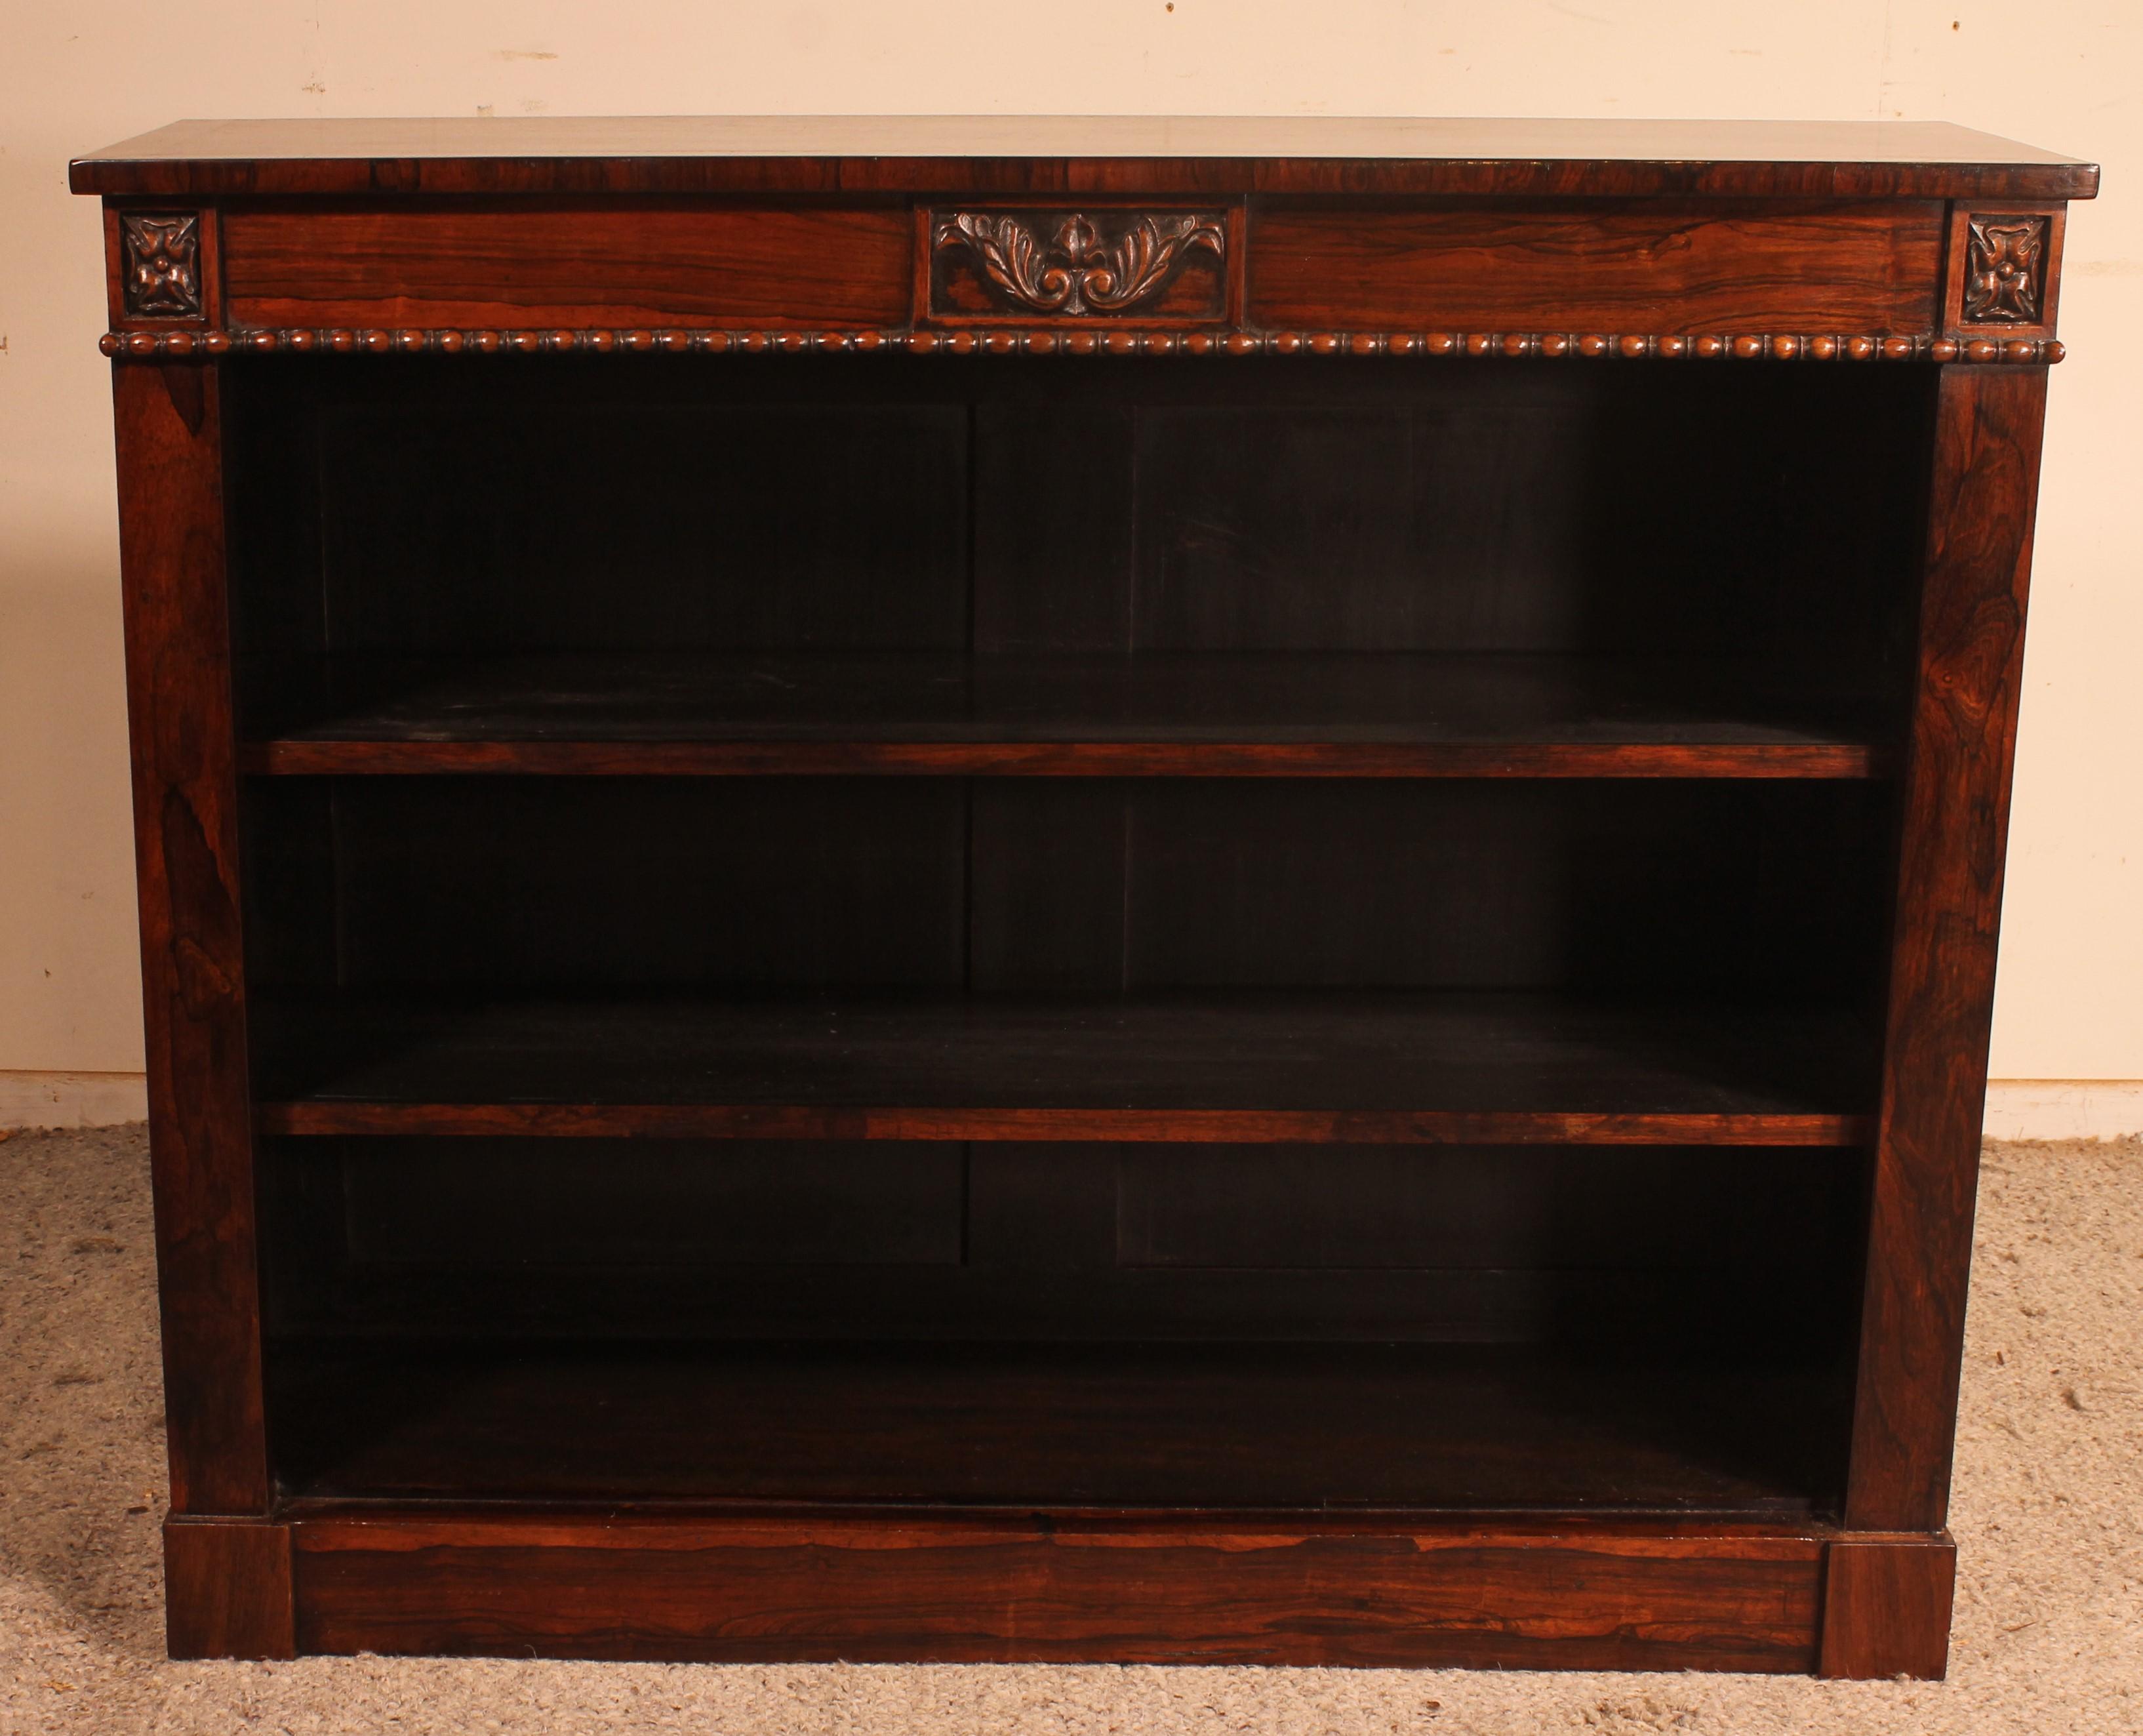 Lovely and rare rosewood bookcase regency period, circa 1800.
It is rare to find a rosewood bookcases that is regency period 
 Beautiful proportions and top decorated with three carvings as well as a beading
Original shelves with a rosewood